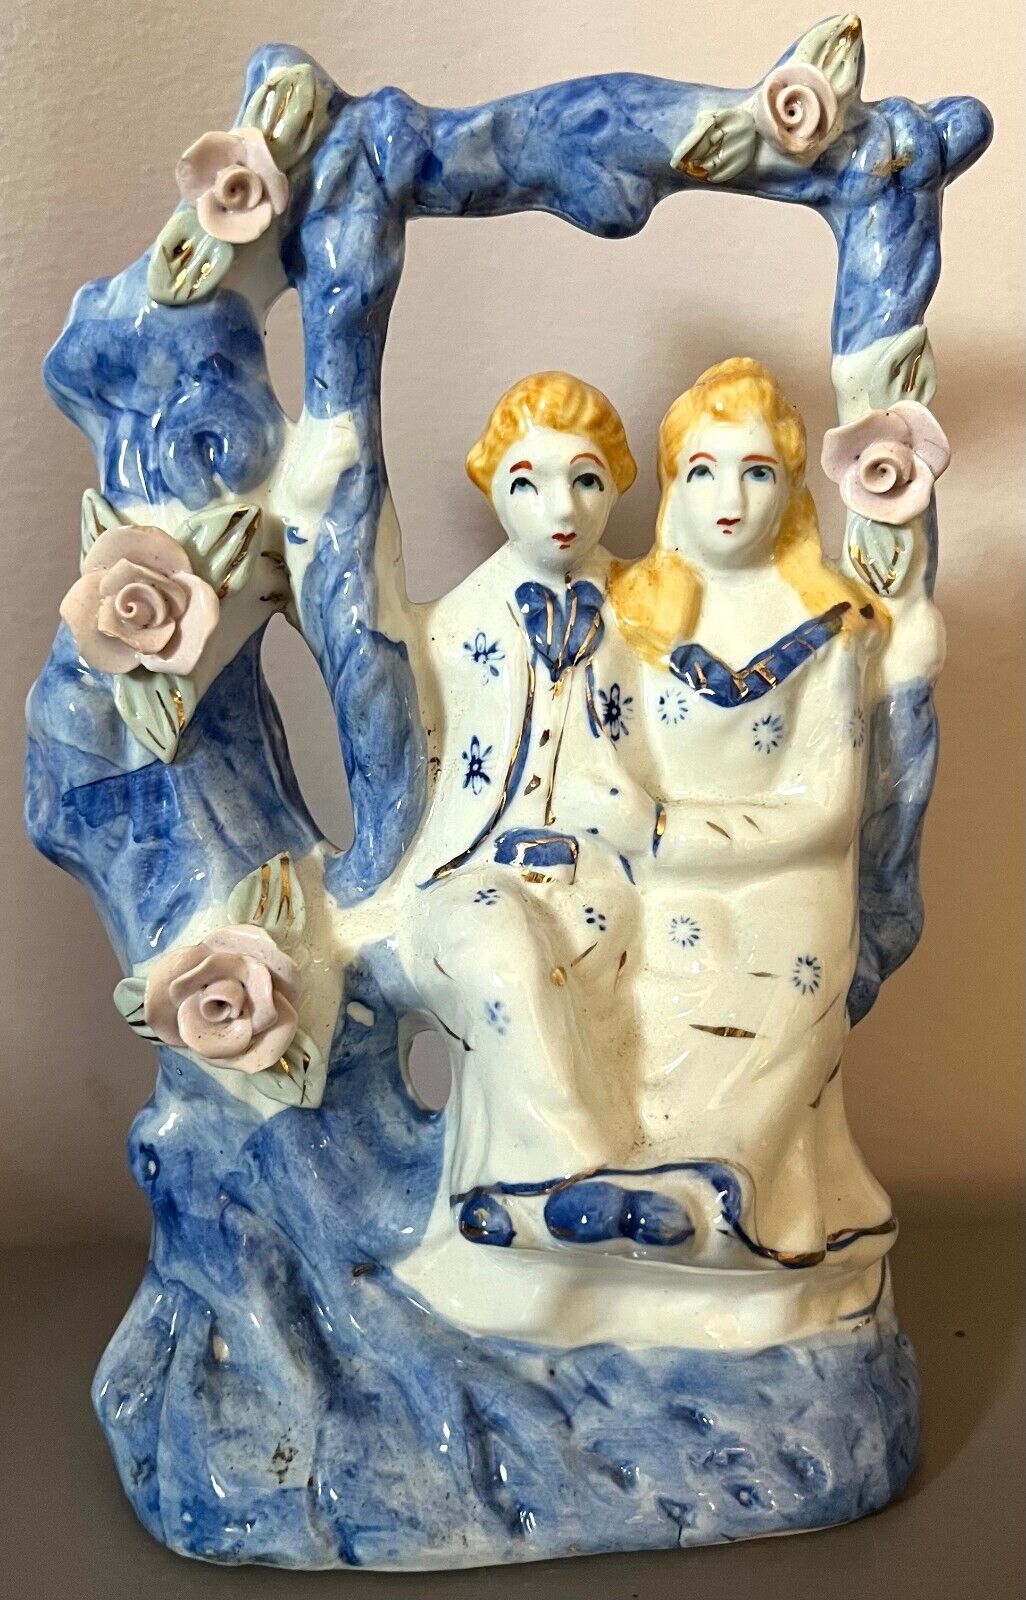 Romantic Couple on a Swing with Roses Figurine from China Vintage